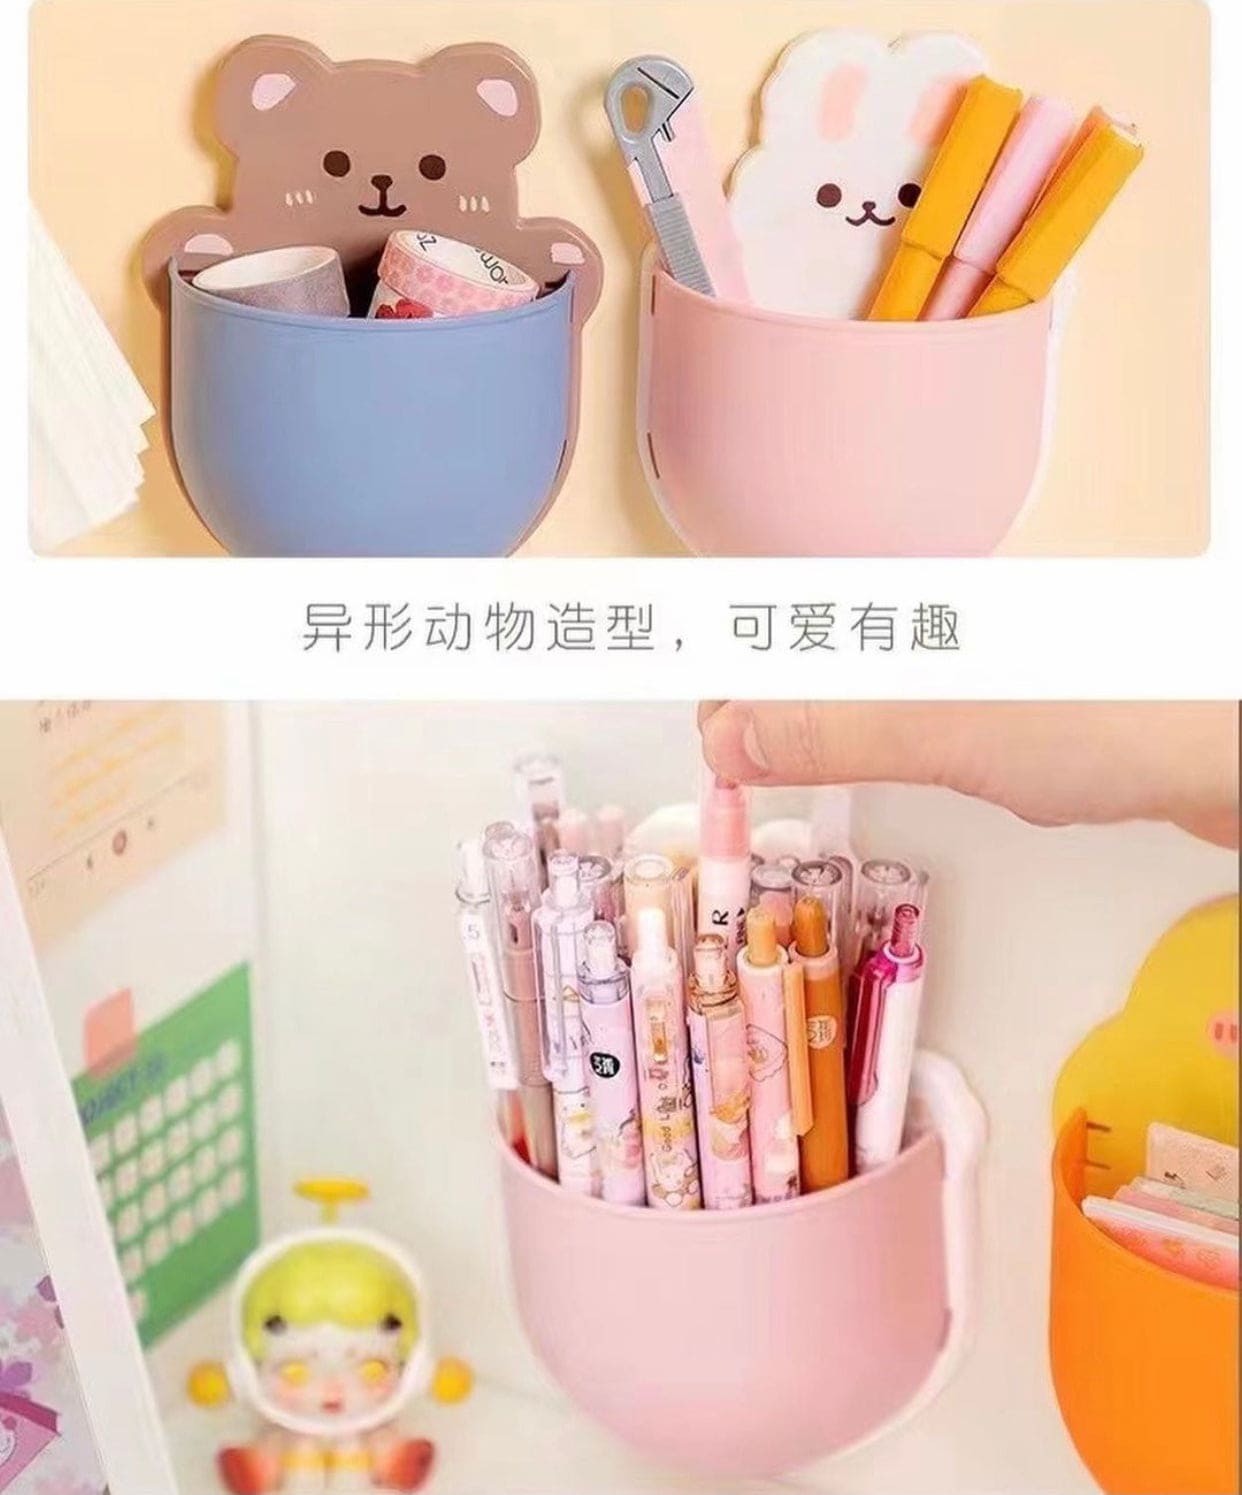 Cute Cartoon Shaped Wall Mounted Phone And Stationary Holder, Self Adhesive Drain Free Comb Toothpaste Storage Box, Toilet Toothbrush Rack